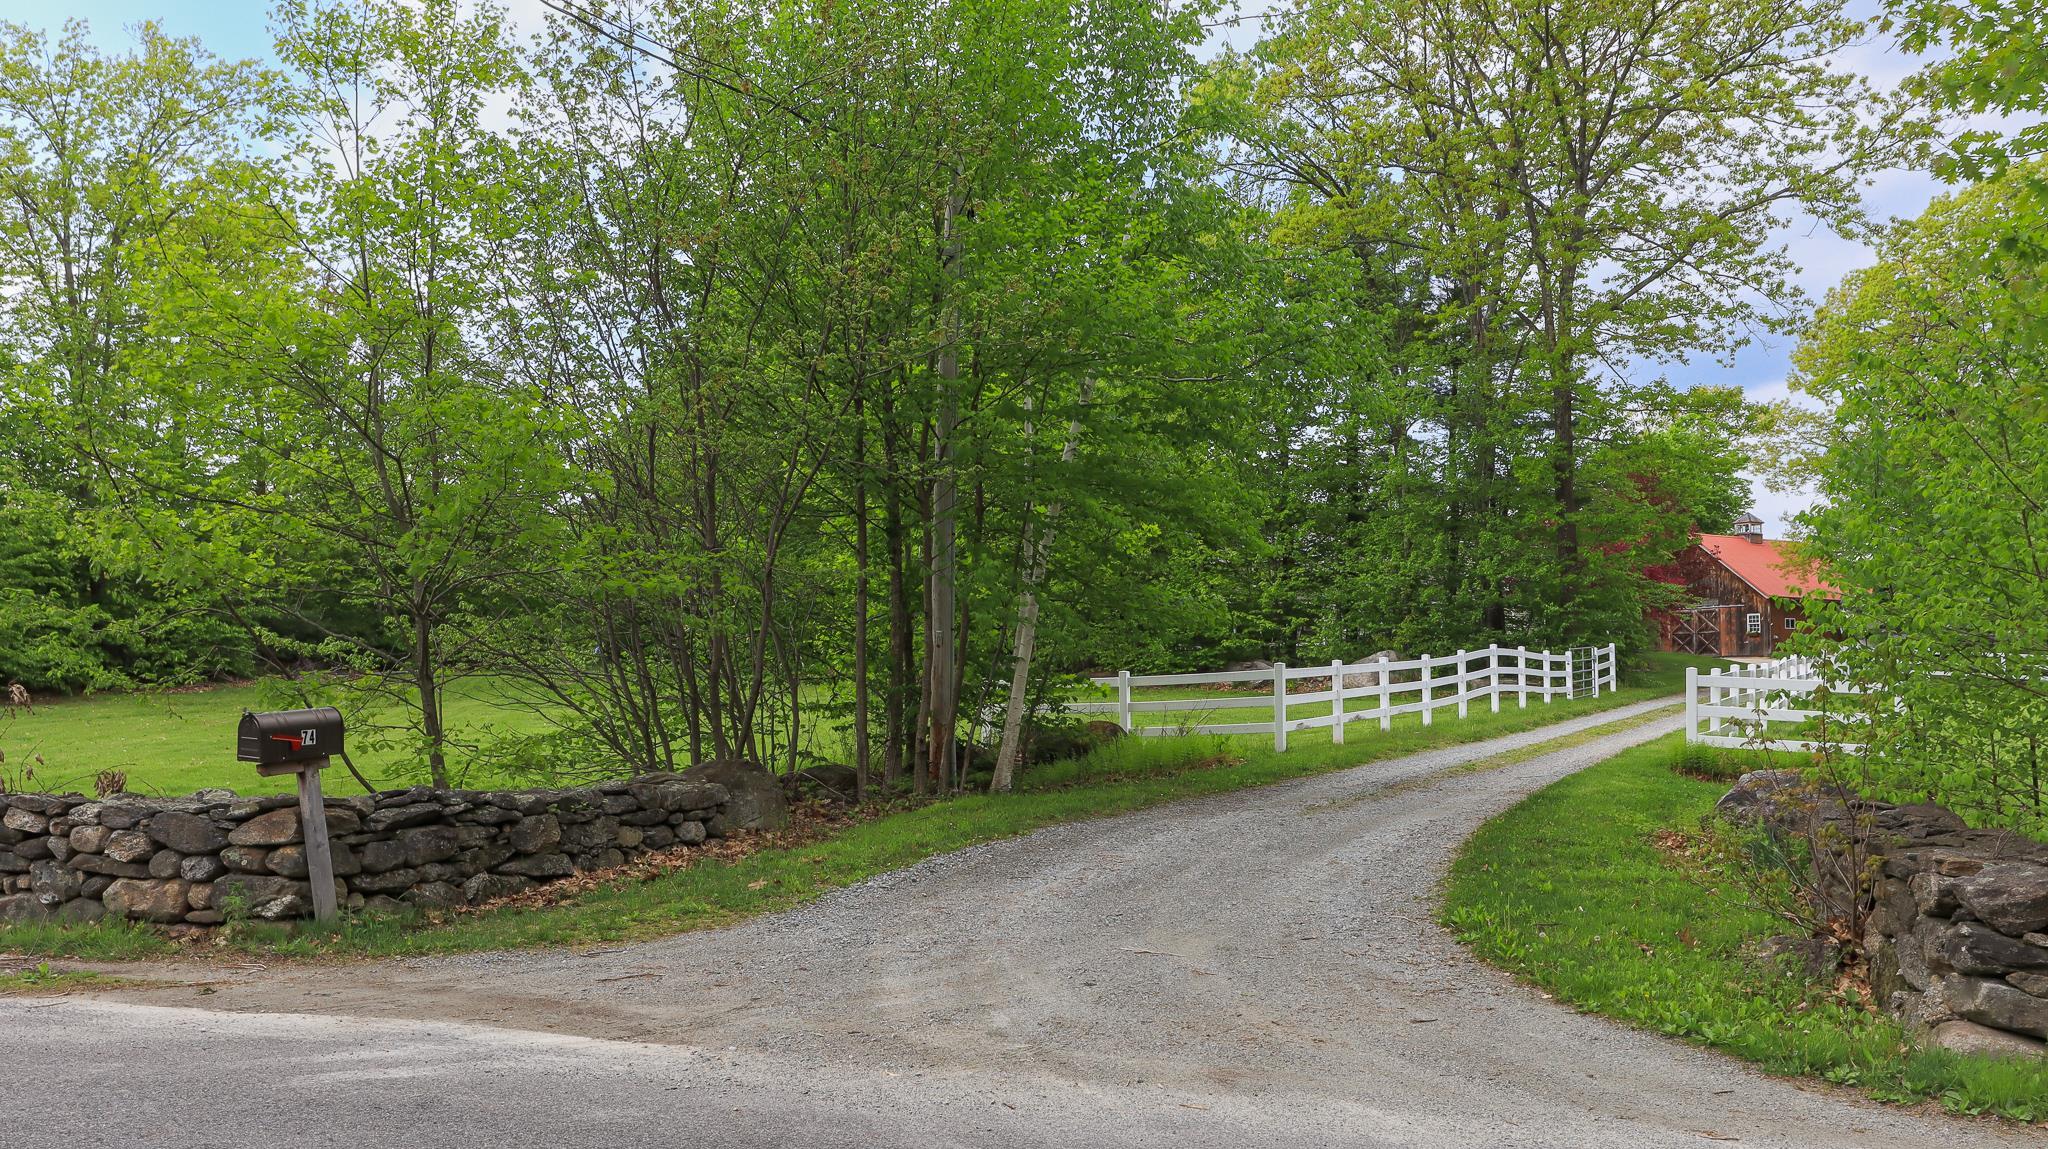 Long Drive for Privacey -Stone Walls and Vinyl Fencing